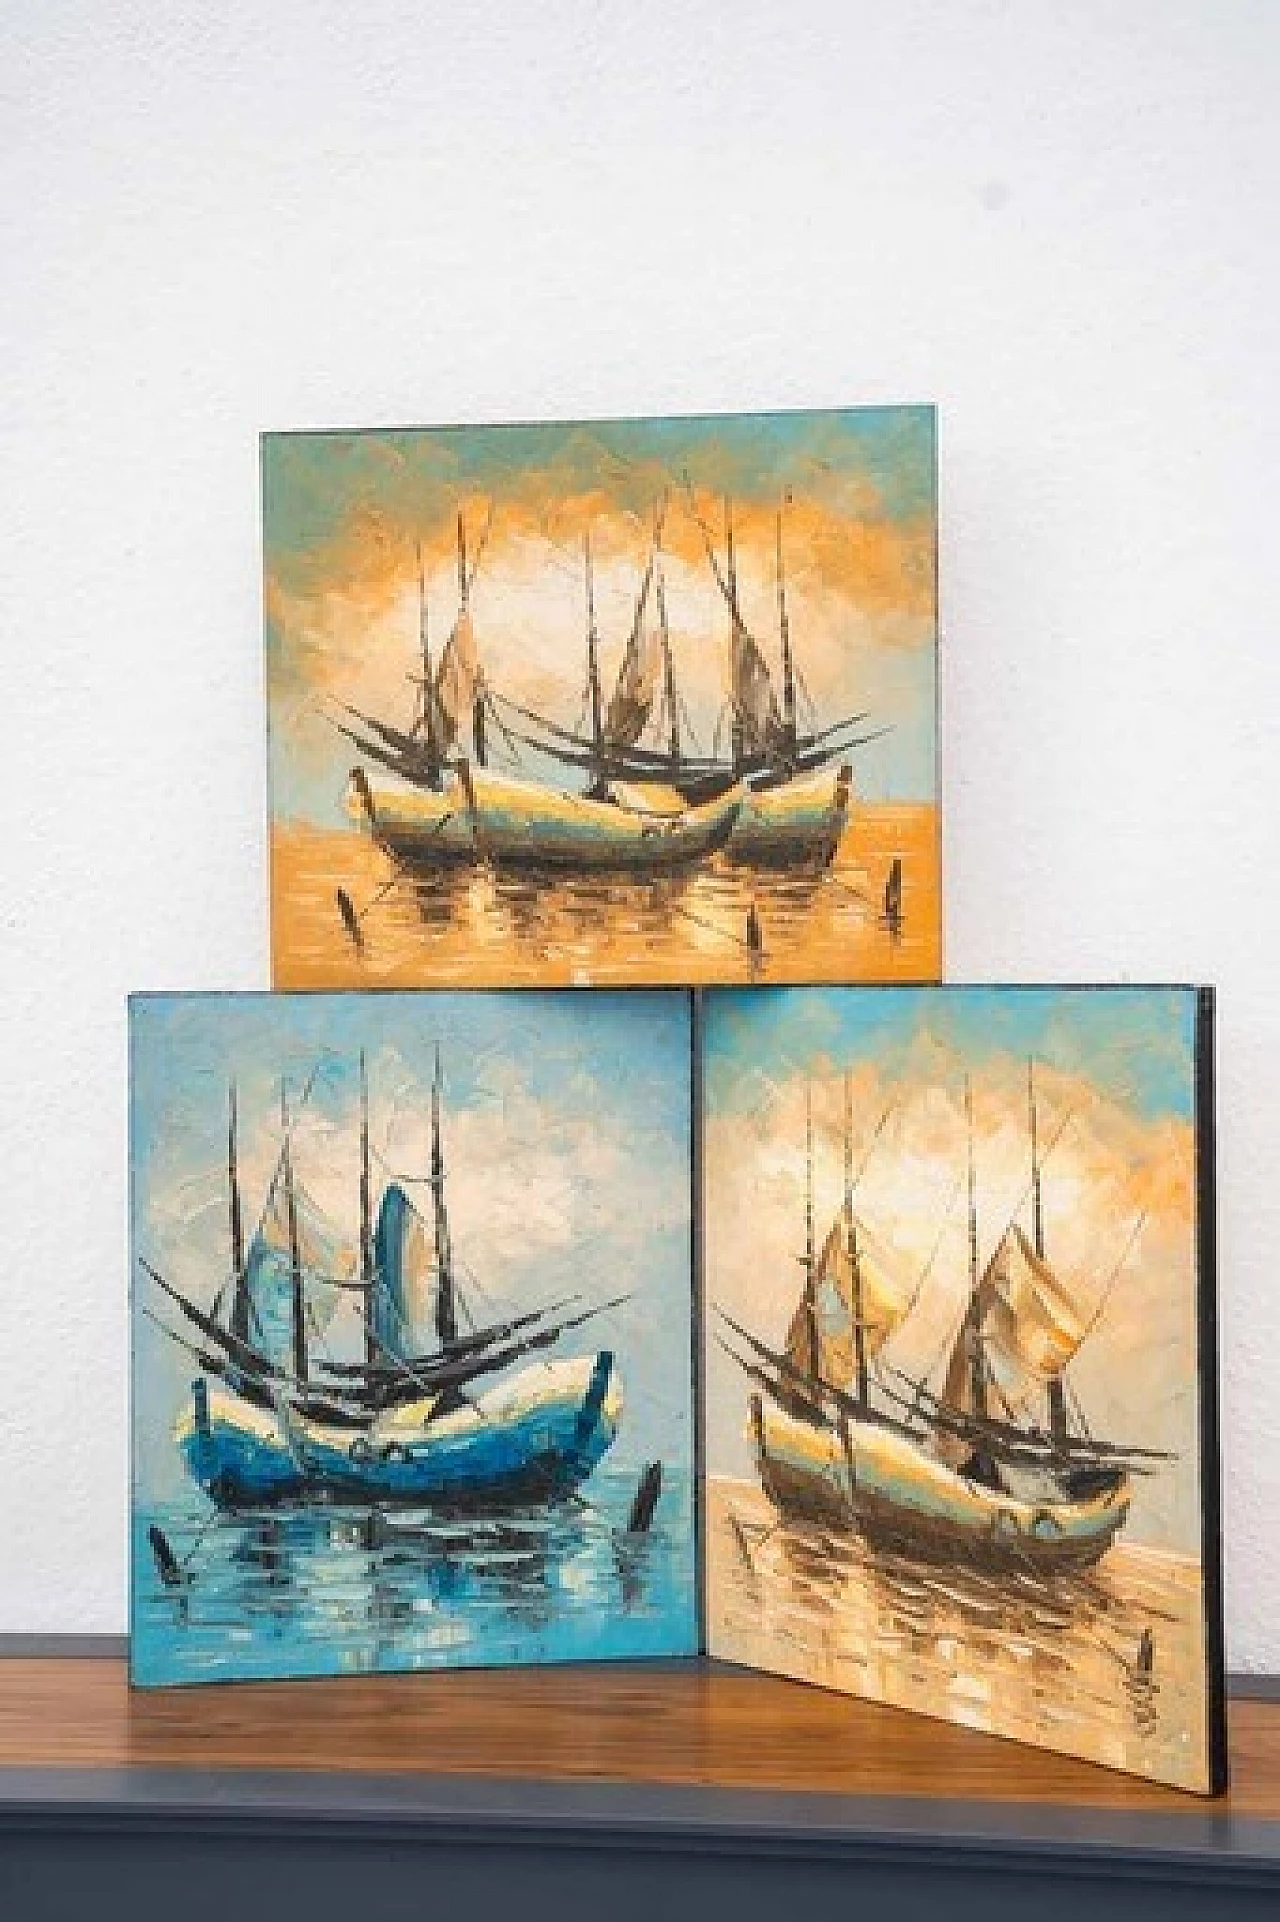 3 Acrylic paintings on canvas of sailboats, 2000s 18